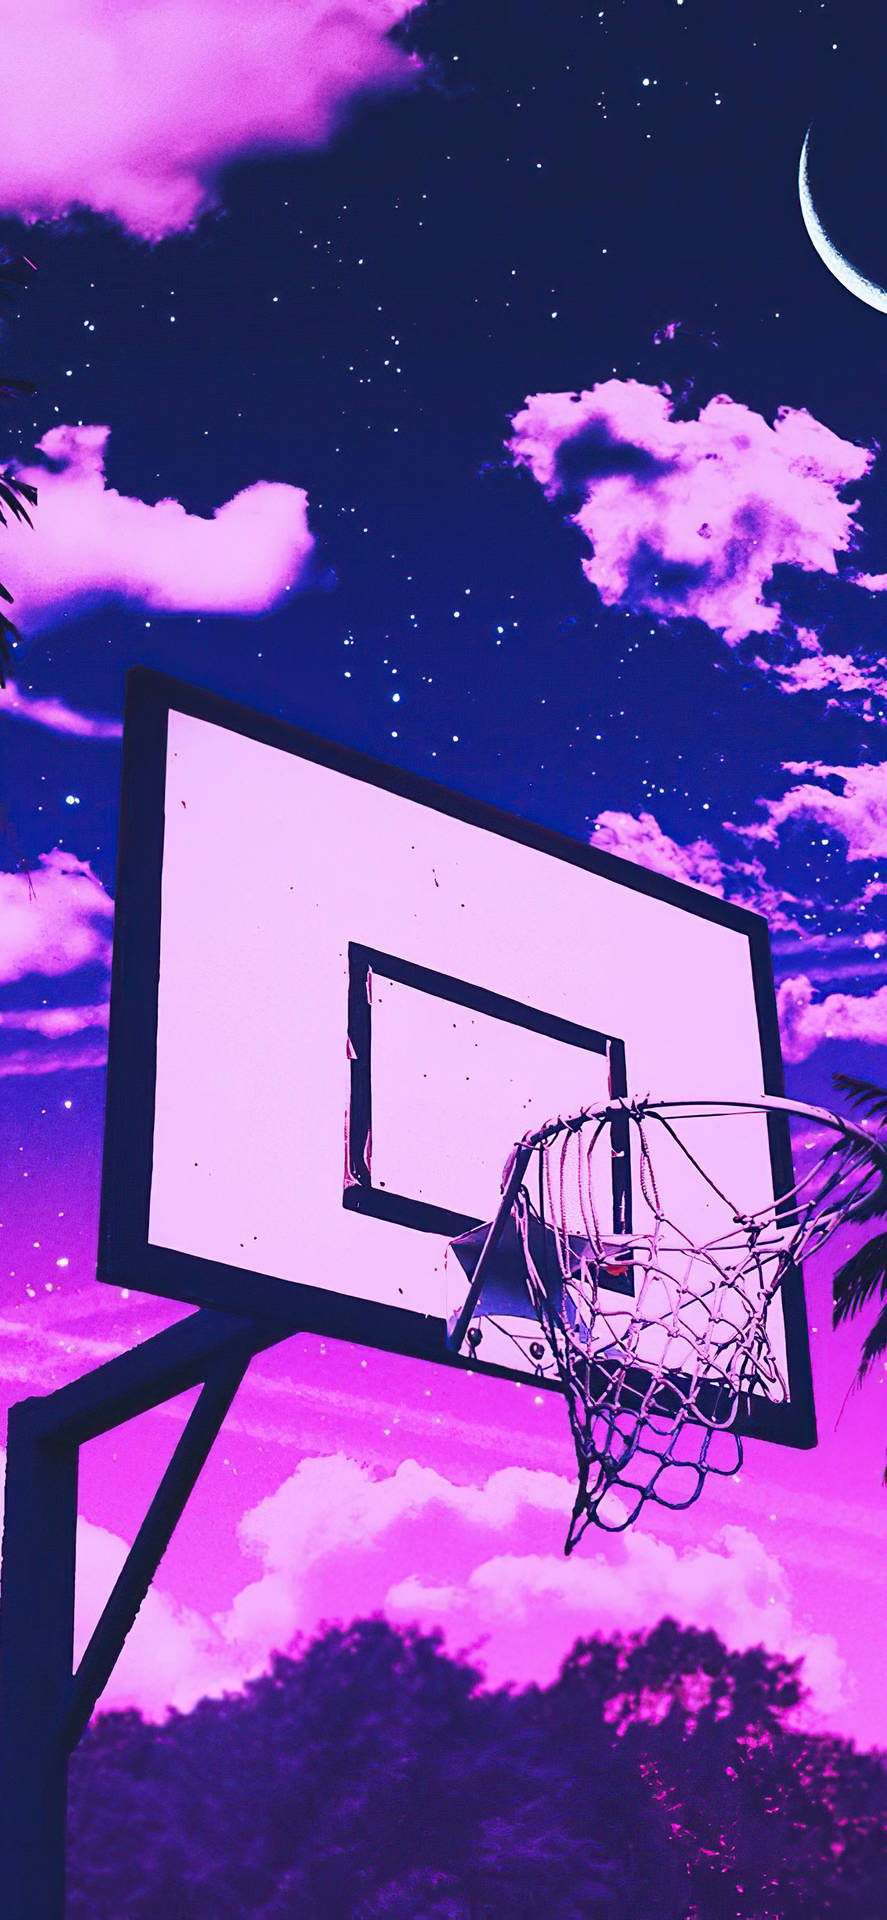 Basketball Iphone Ring And Purple Clouds